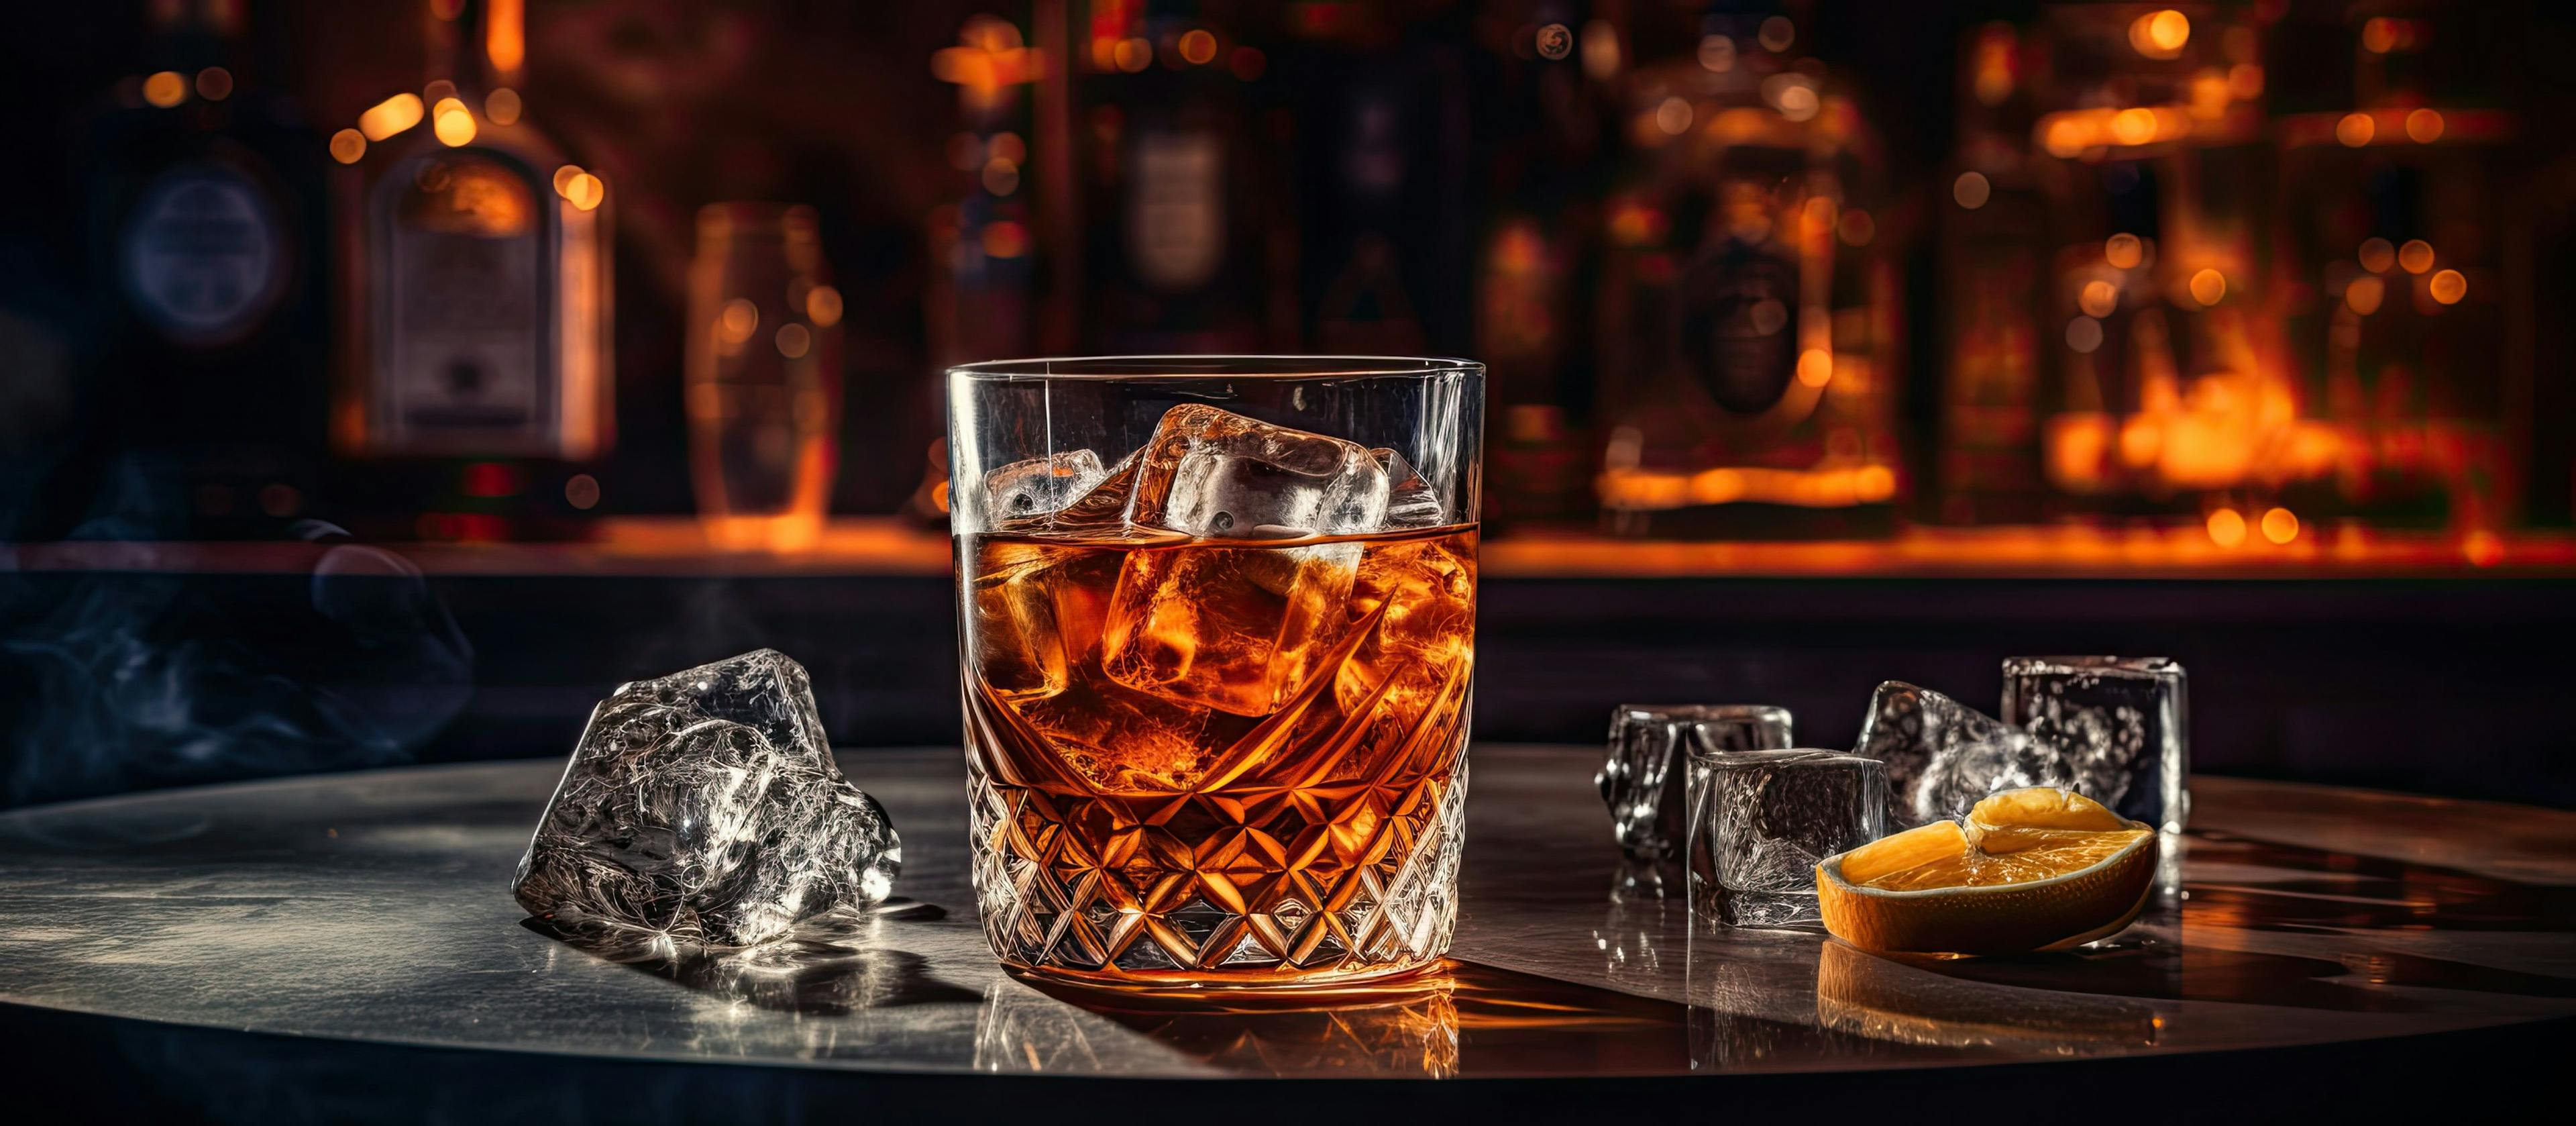 a dark and moody atmosphere with a glass of sophisticated whiskey, including ice cubes, placed on a wooden table | Image Credit: © HN Works - stock.adobe.com